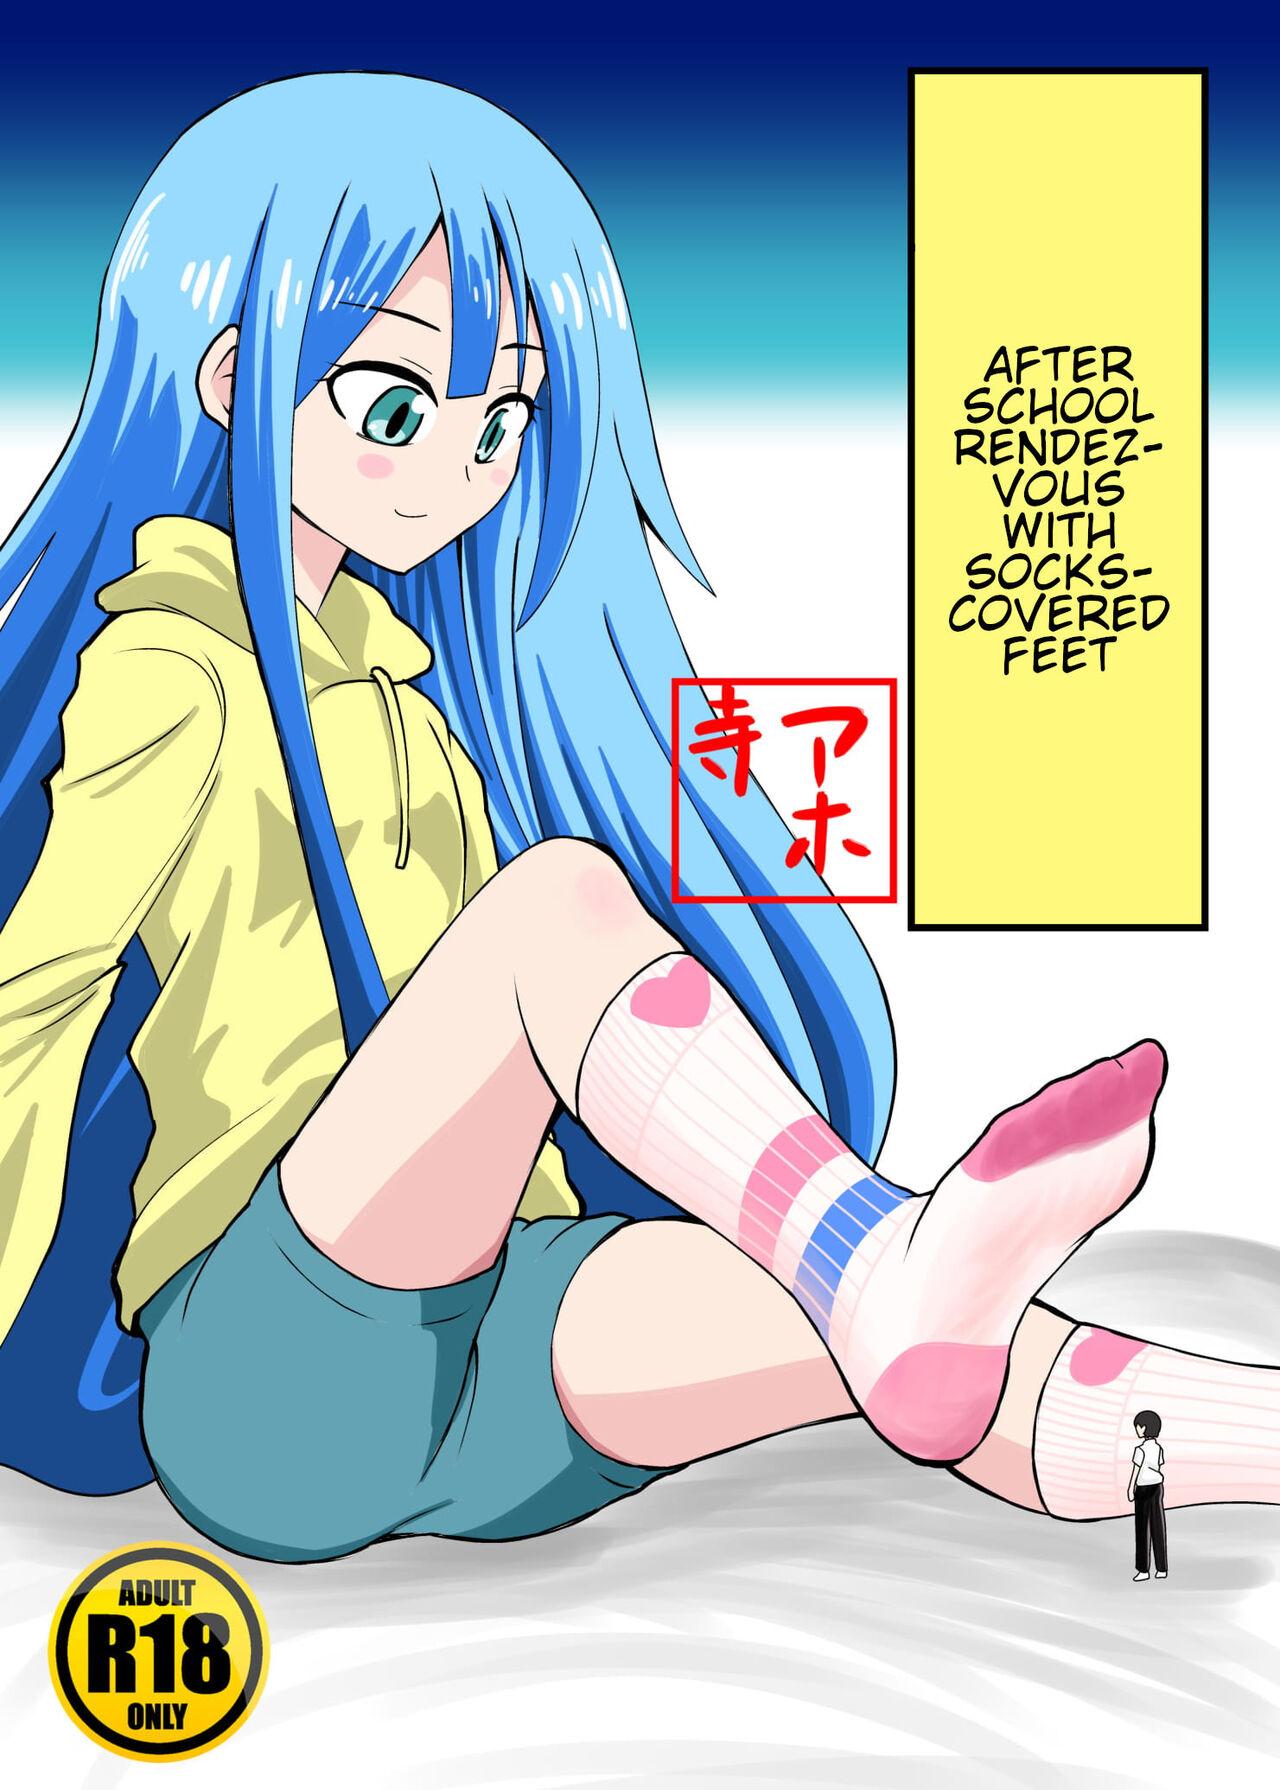 Houkago Ashi Mamire Kutsushita Rendezvous | After school rendezvous with socks-covered feet 0